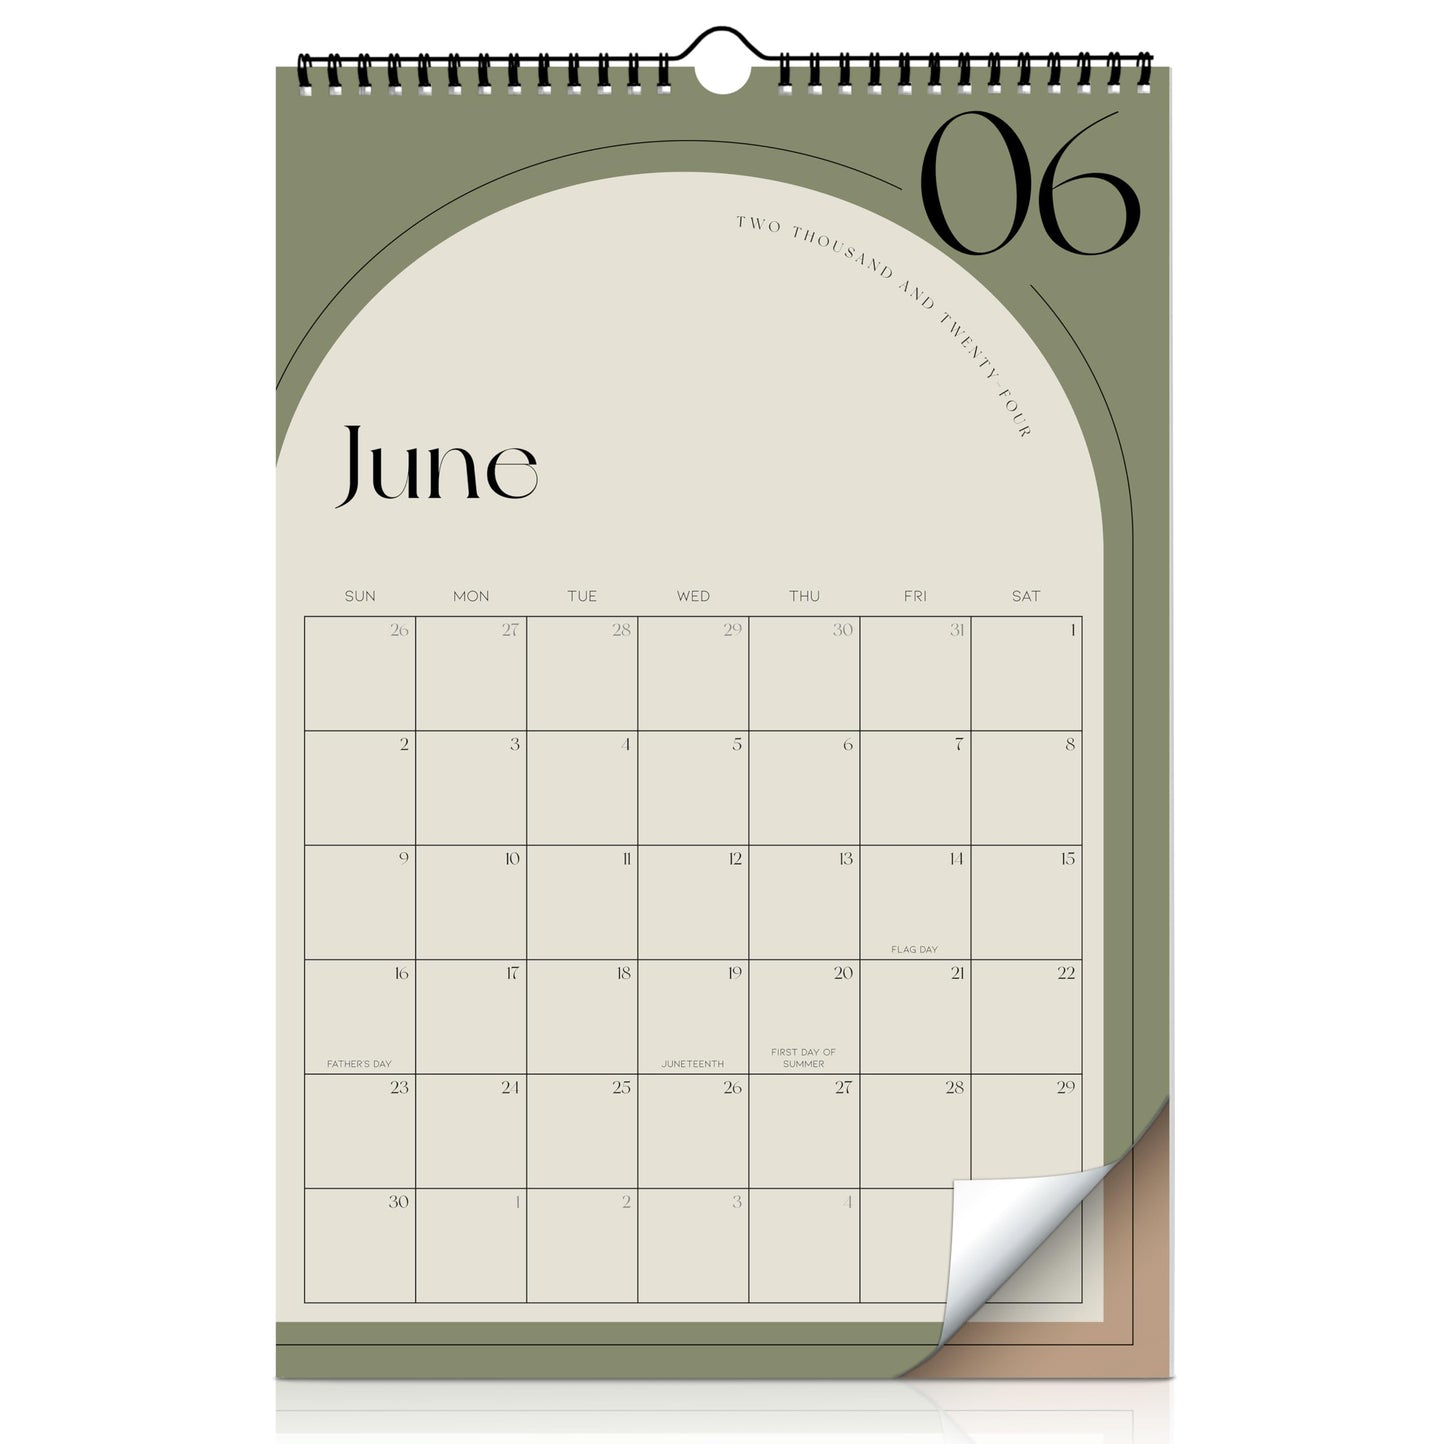 Aesthetic 2024-2025 Wall Calendar - Runs from June 2024 Until December 2025 - The Perfect Wall Hanging Calendar Planner for Easy Organizing